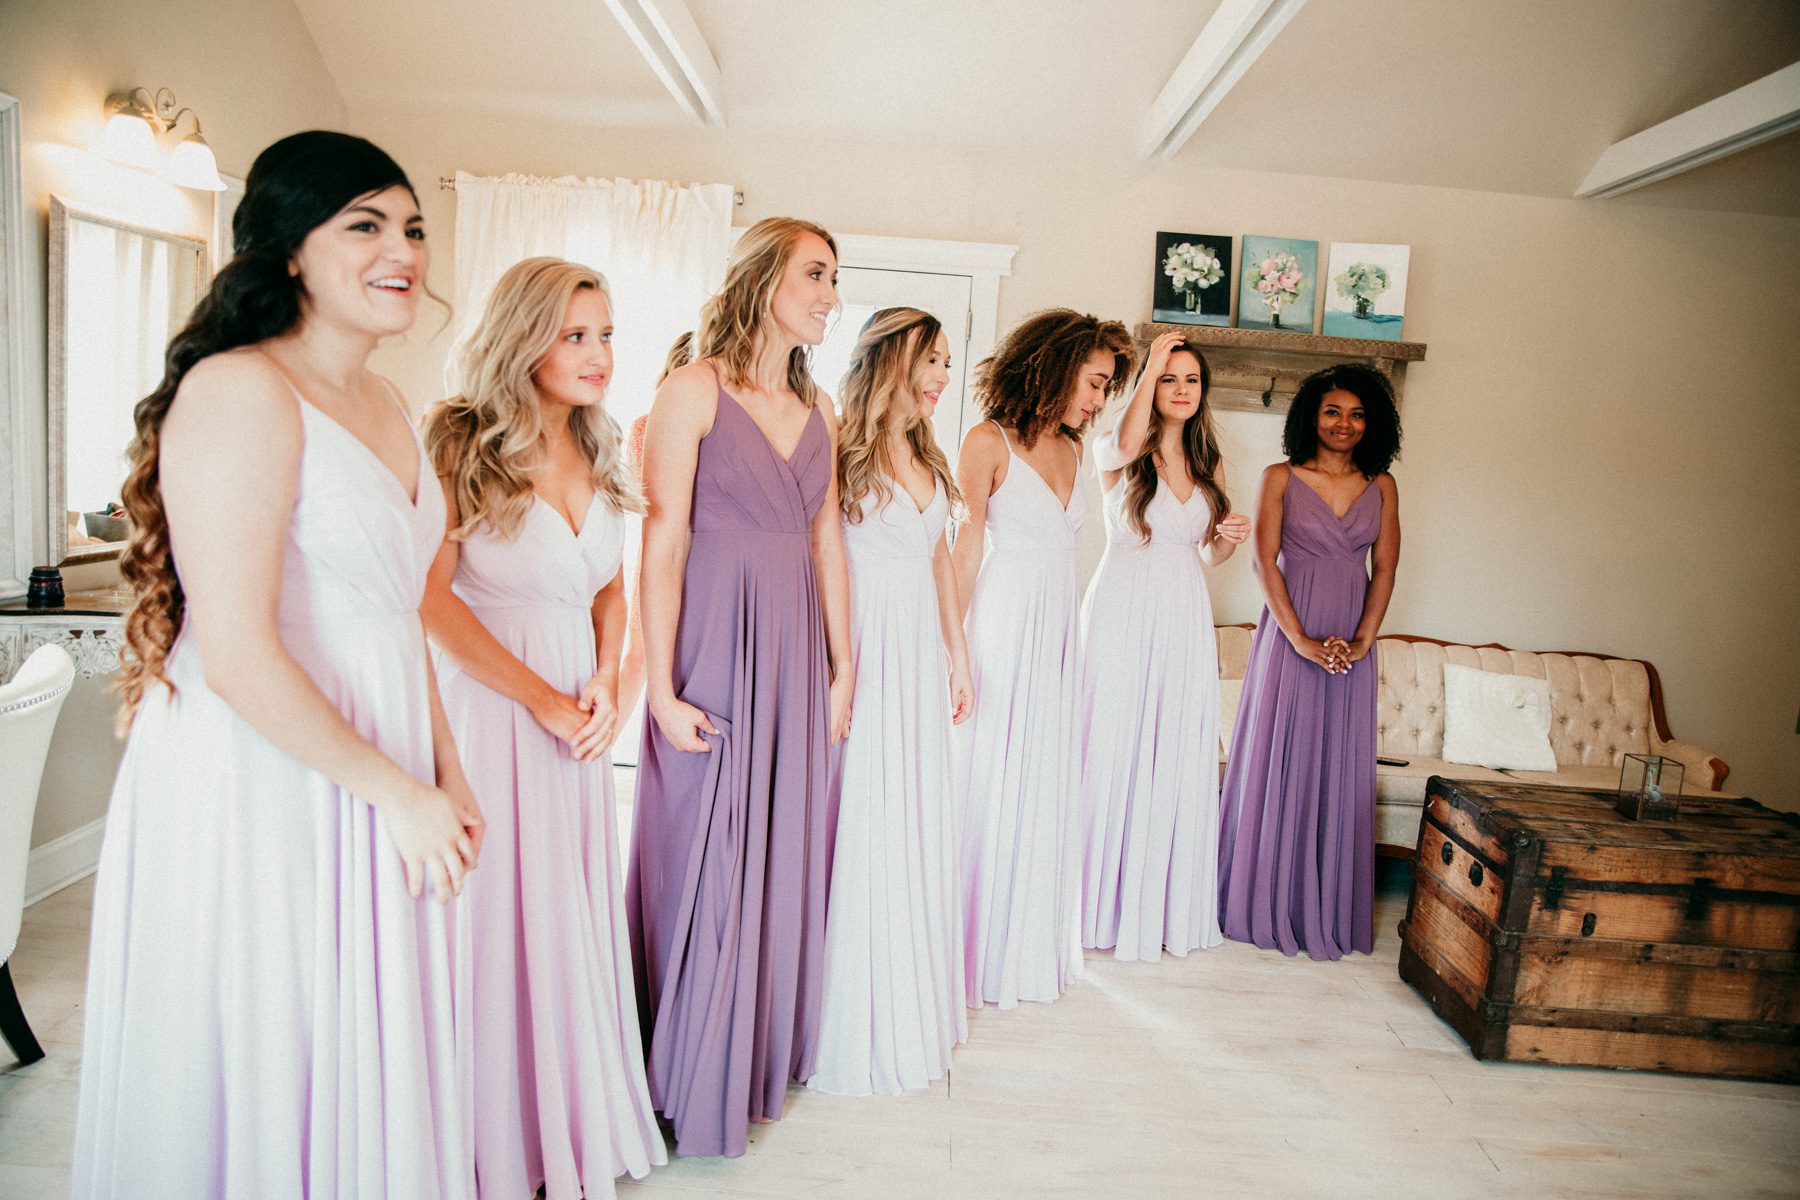 Bridesmaids wait for bride reveal on wedding day 